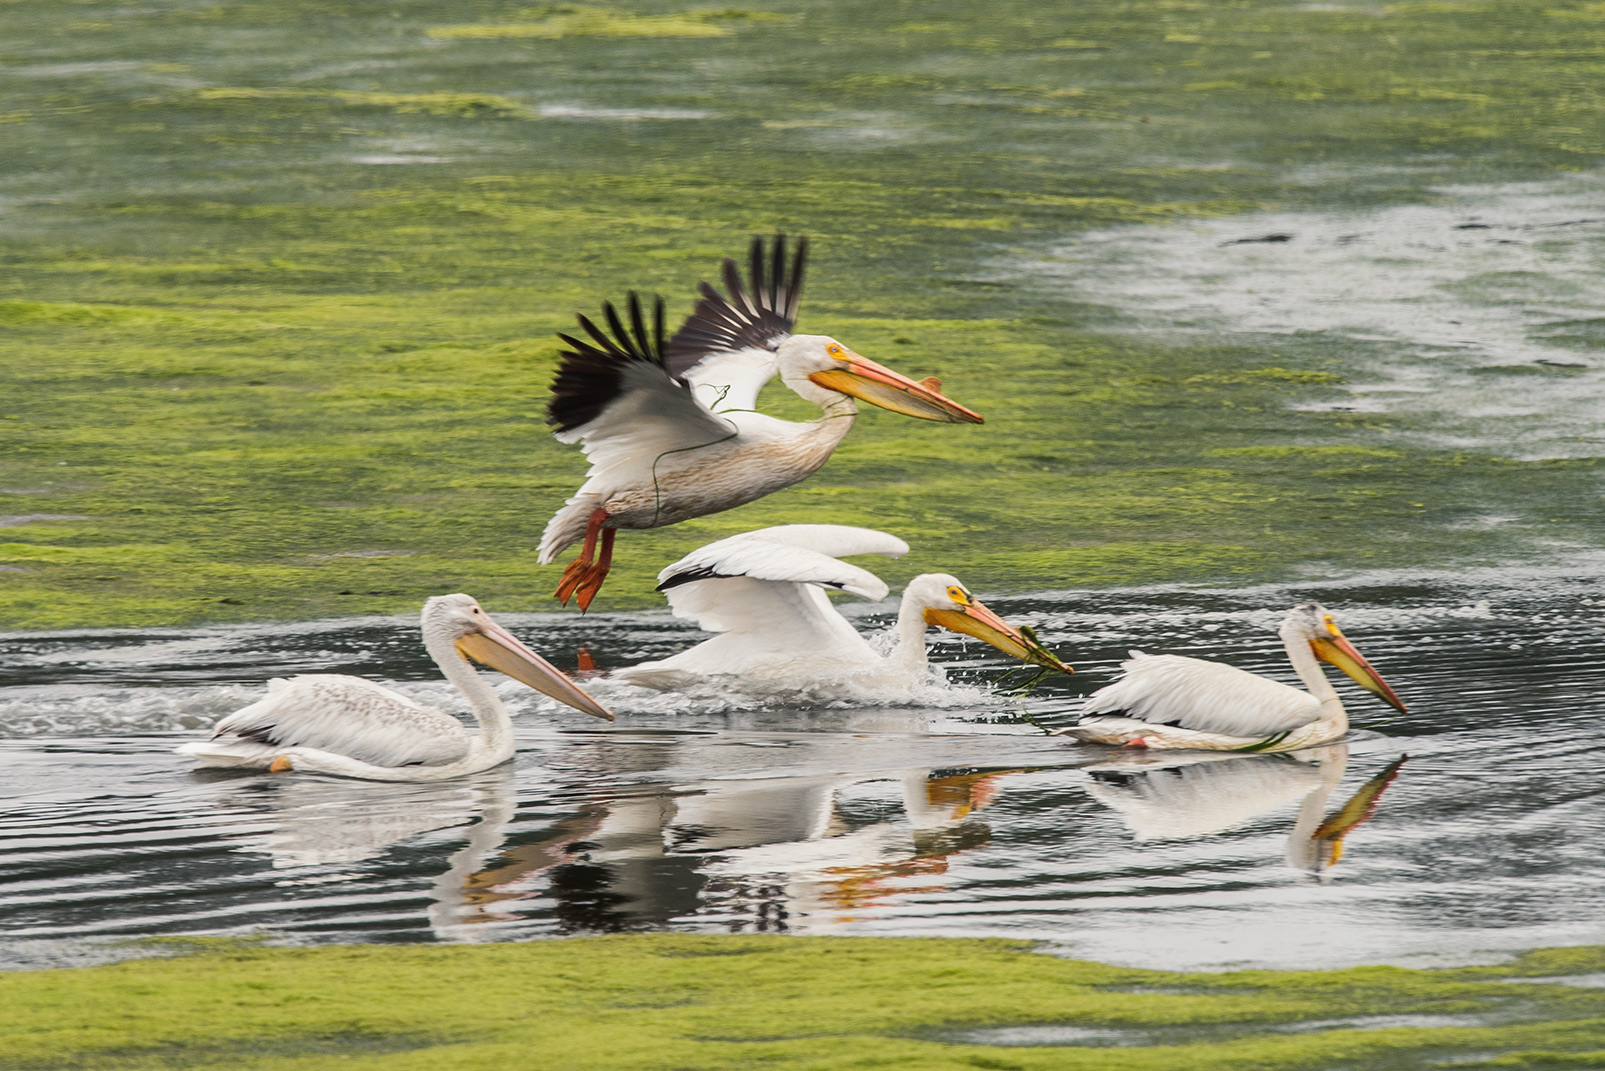 The slough’s inhabitants were forced to adapt to dramatic tides and other changes when the U.S. Army Corps of Engineers carved a new channel to create Moss Landing Harbor in 1947. Today, American white pelicans fish the tidal channels of Elkhorn Slough during low tide. Photo © Kiliii Yuyan